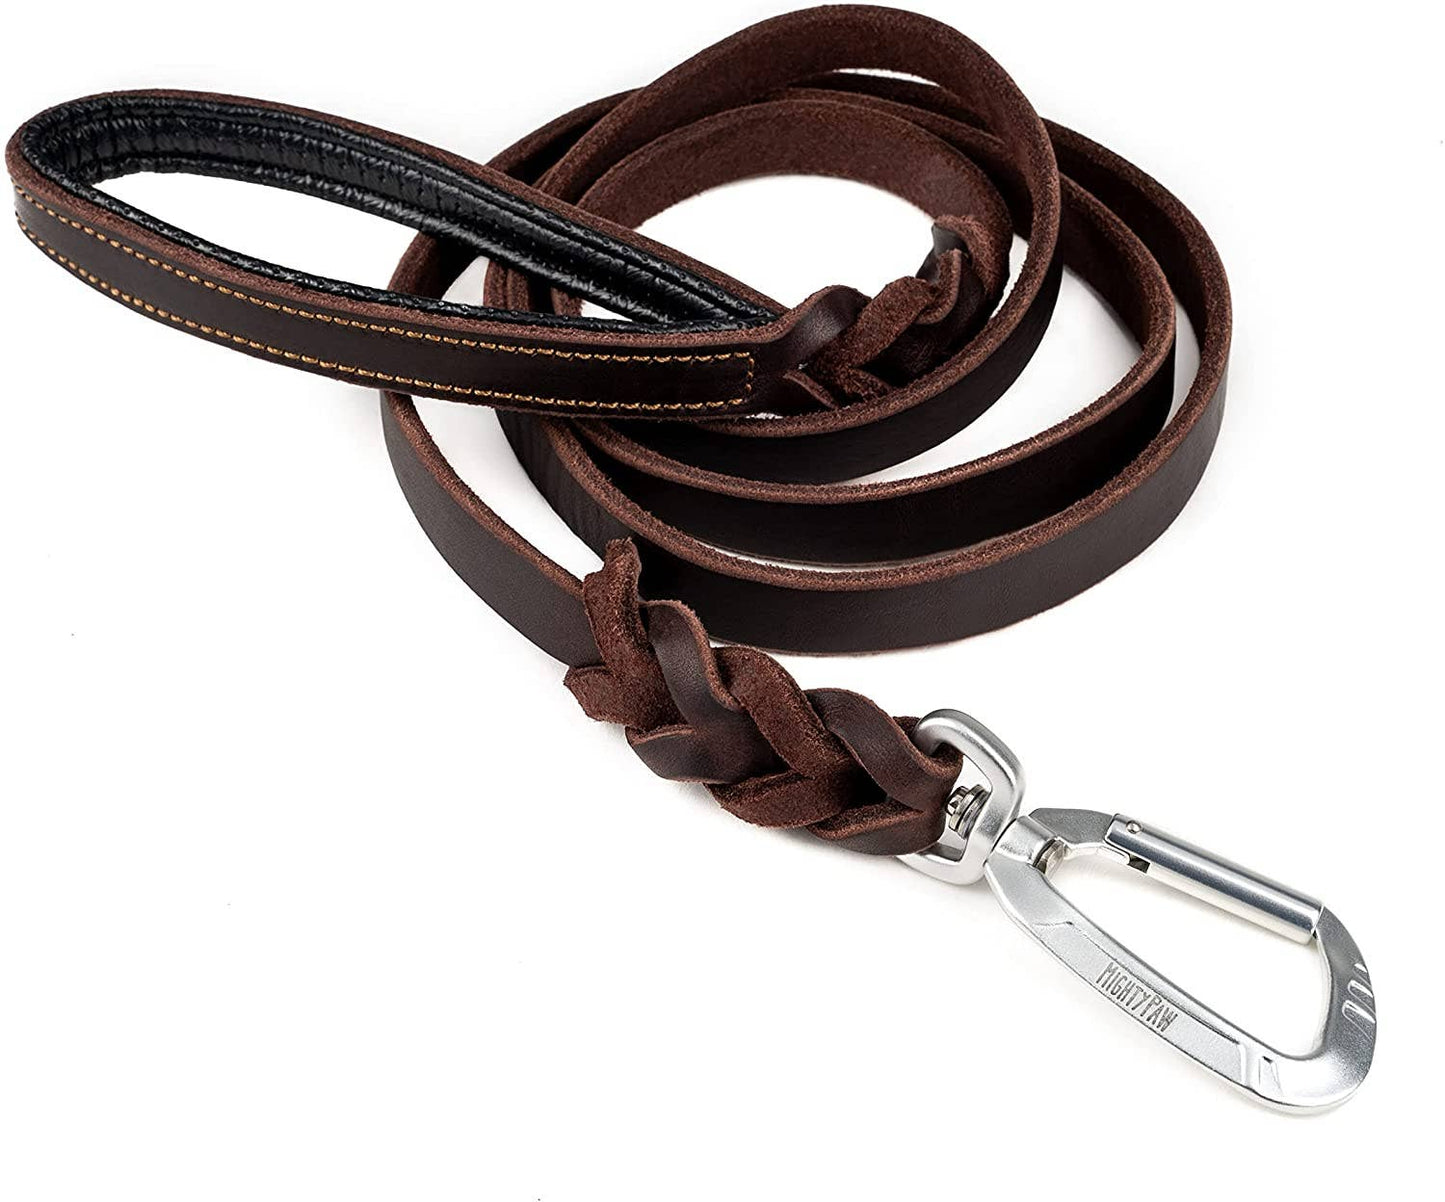 Braided Deluxe Leather Dog Leash